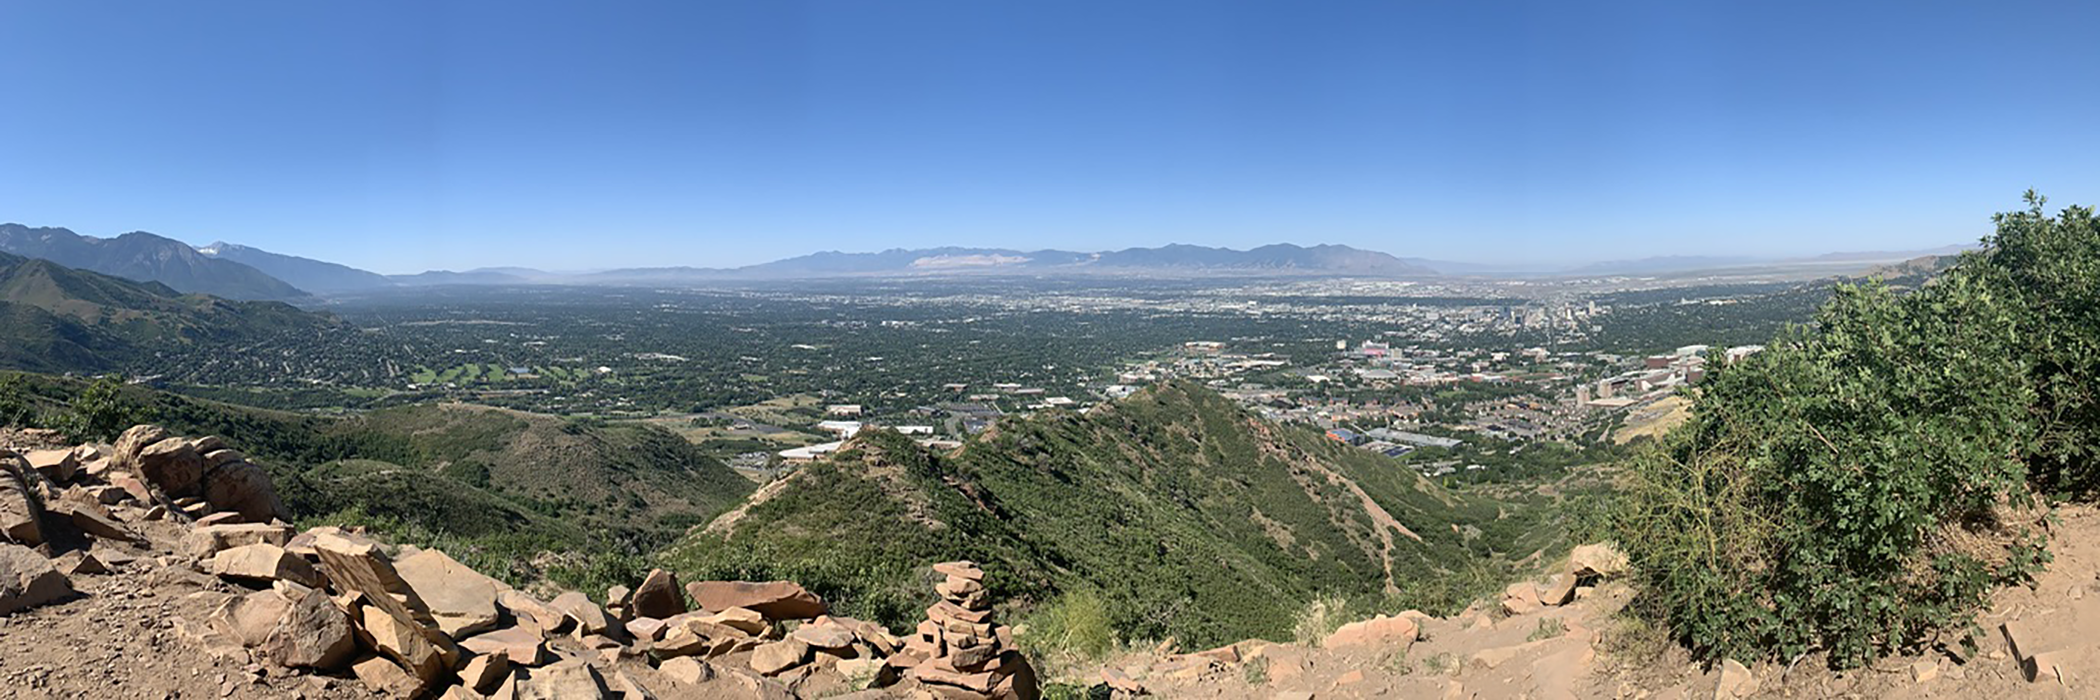 View of Salt Lake Valley from the mountains